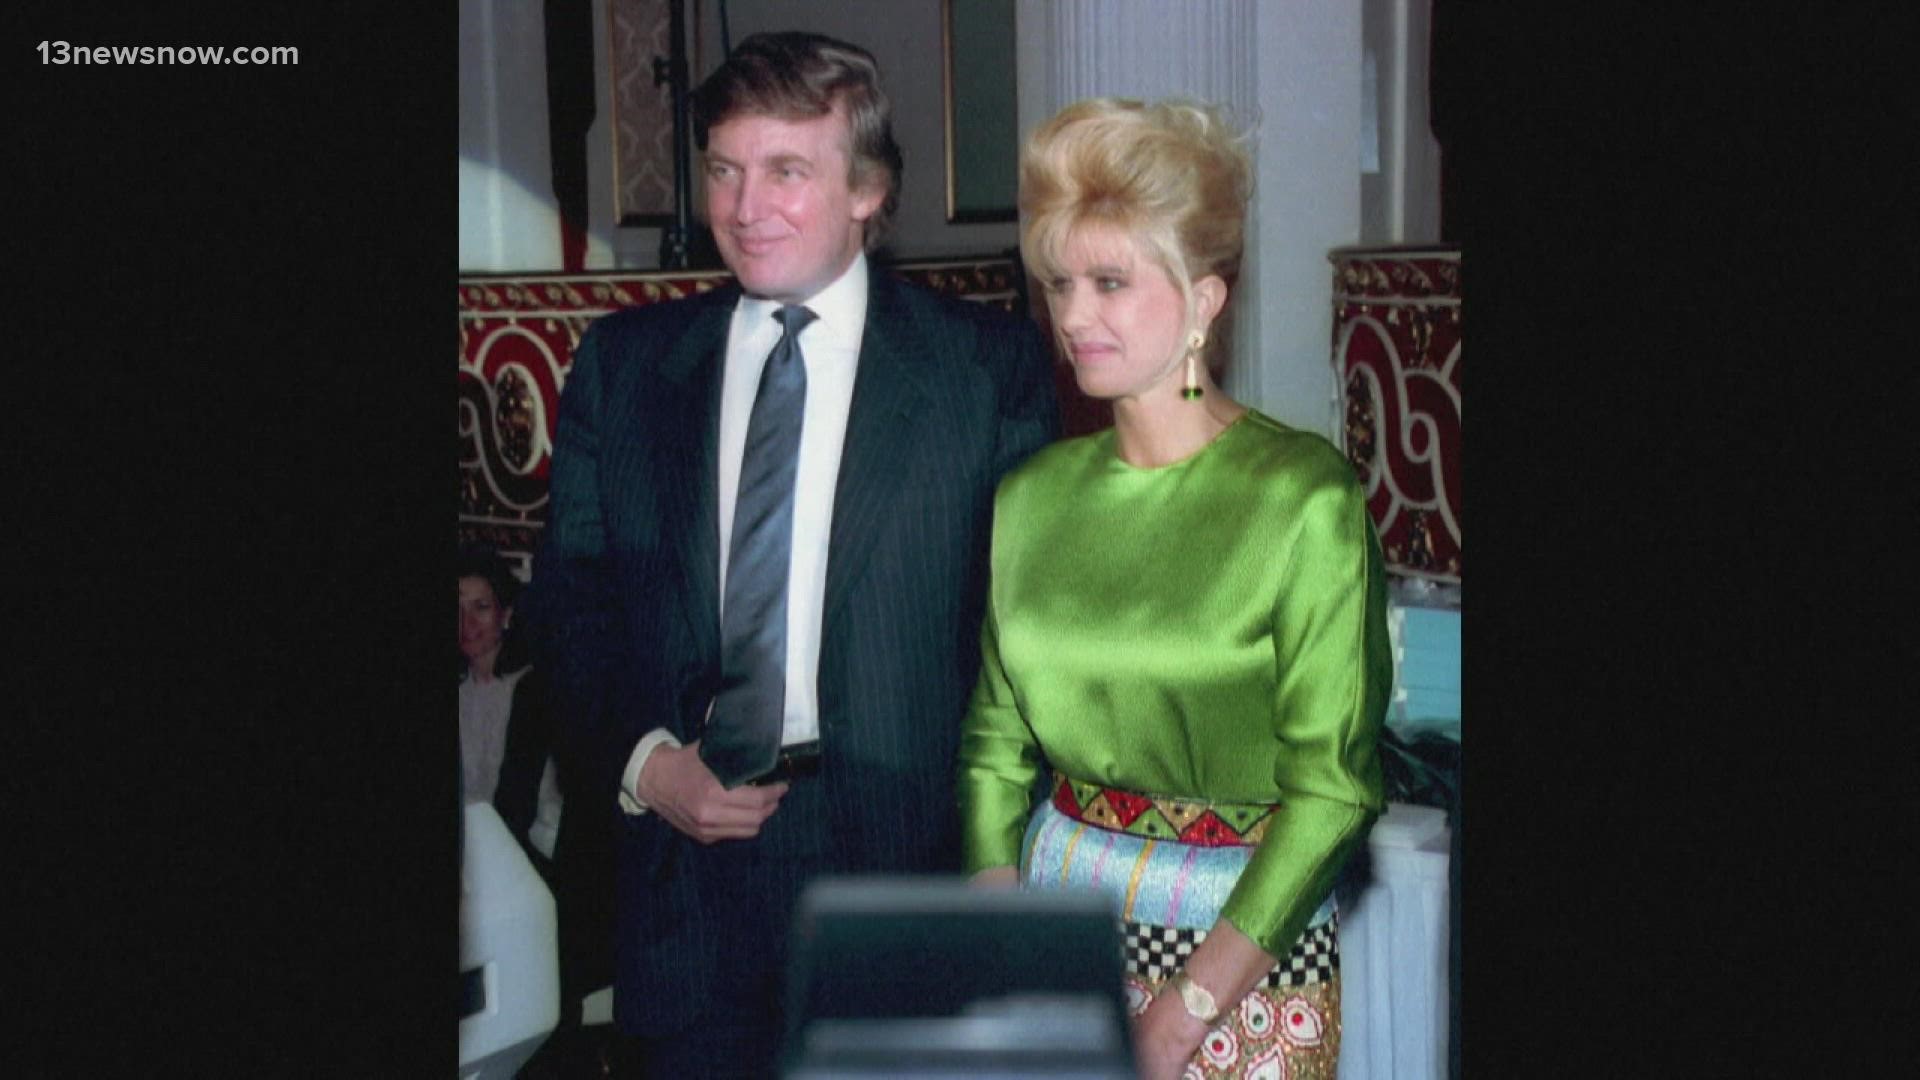 She was the ex-wife of former President Donald Trump and the mother of his three oldest children.